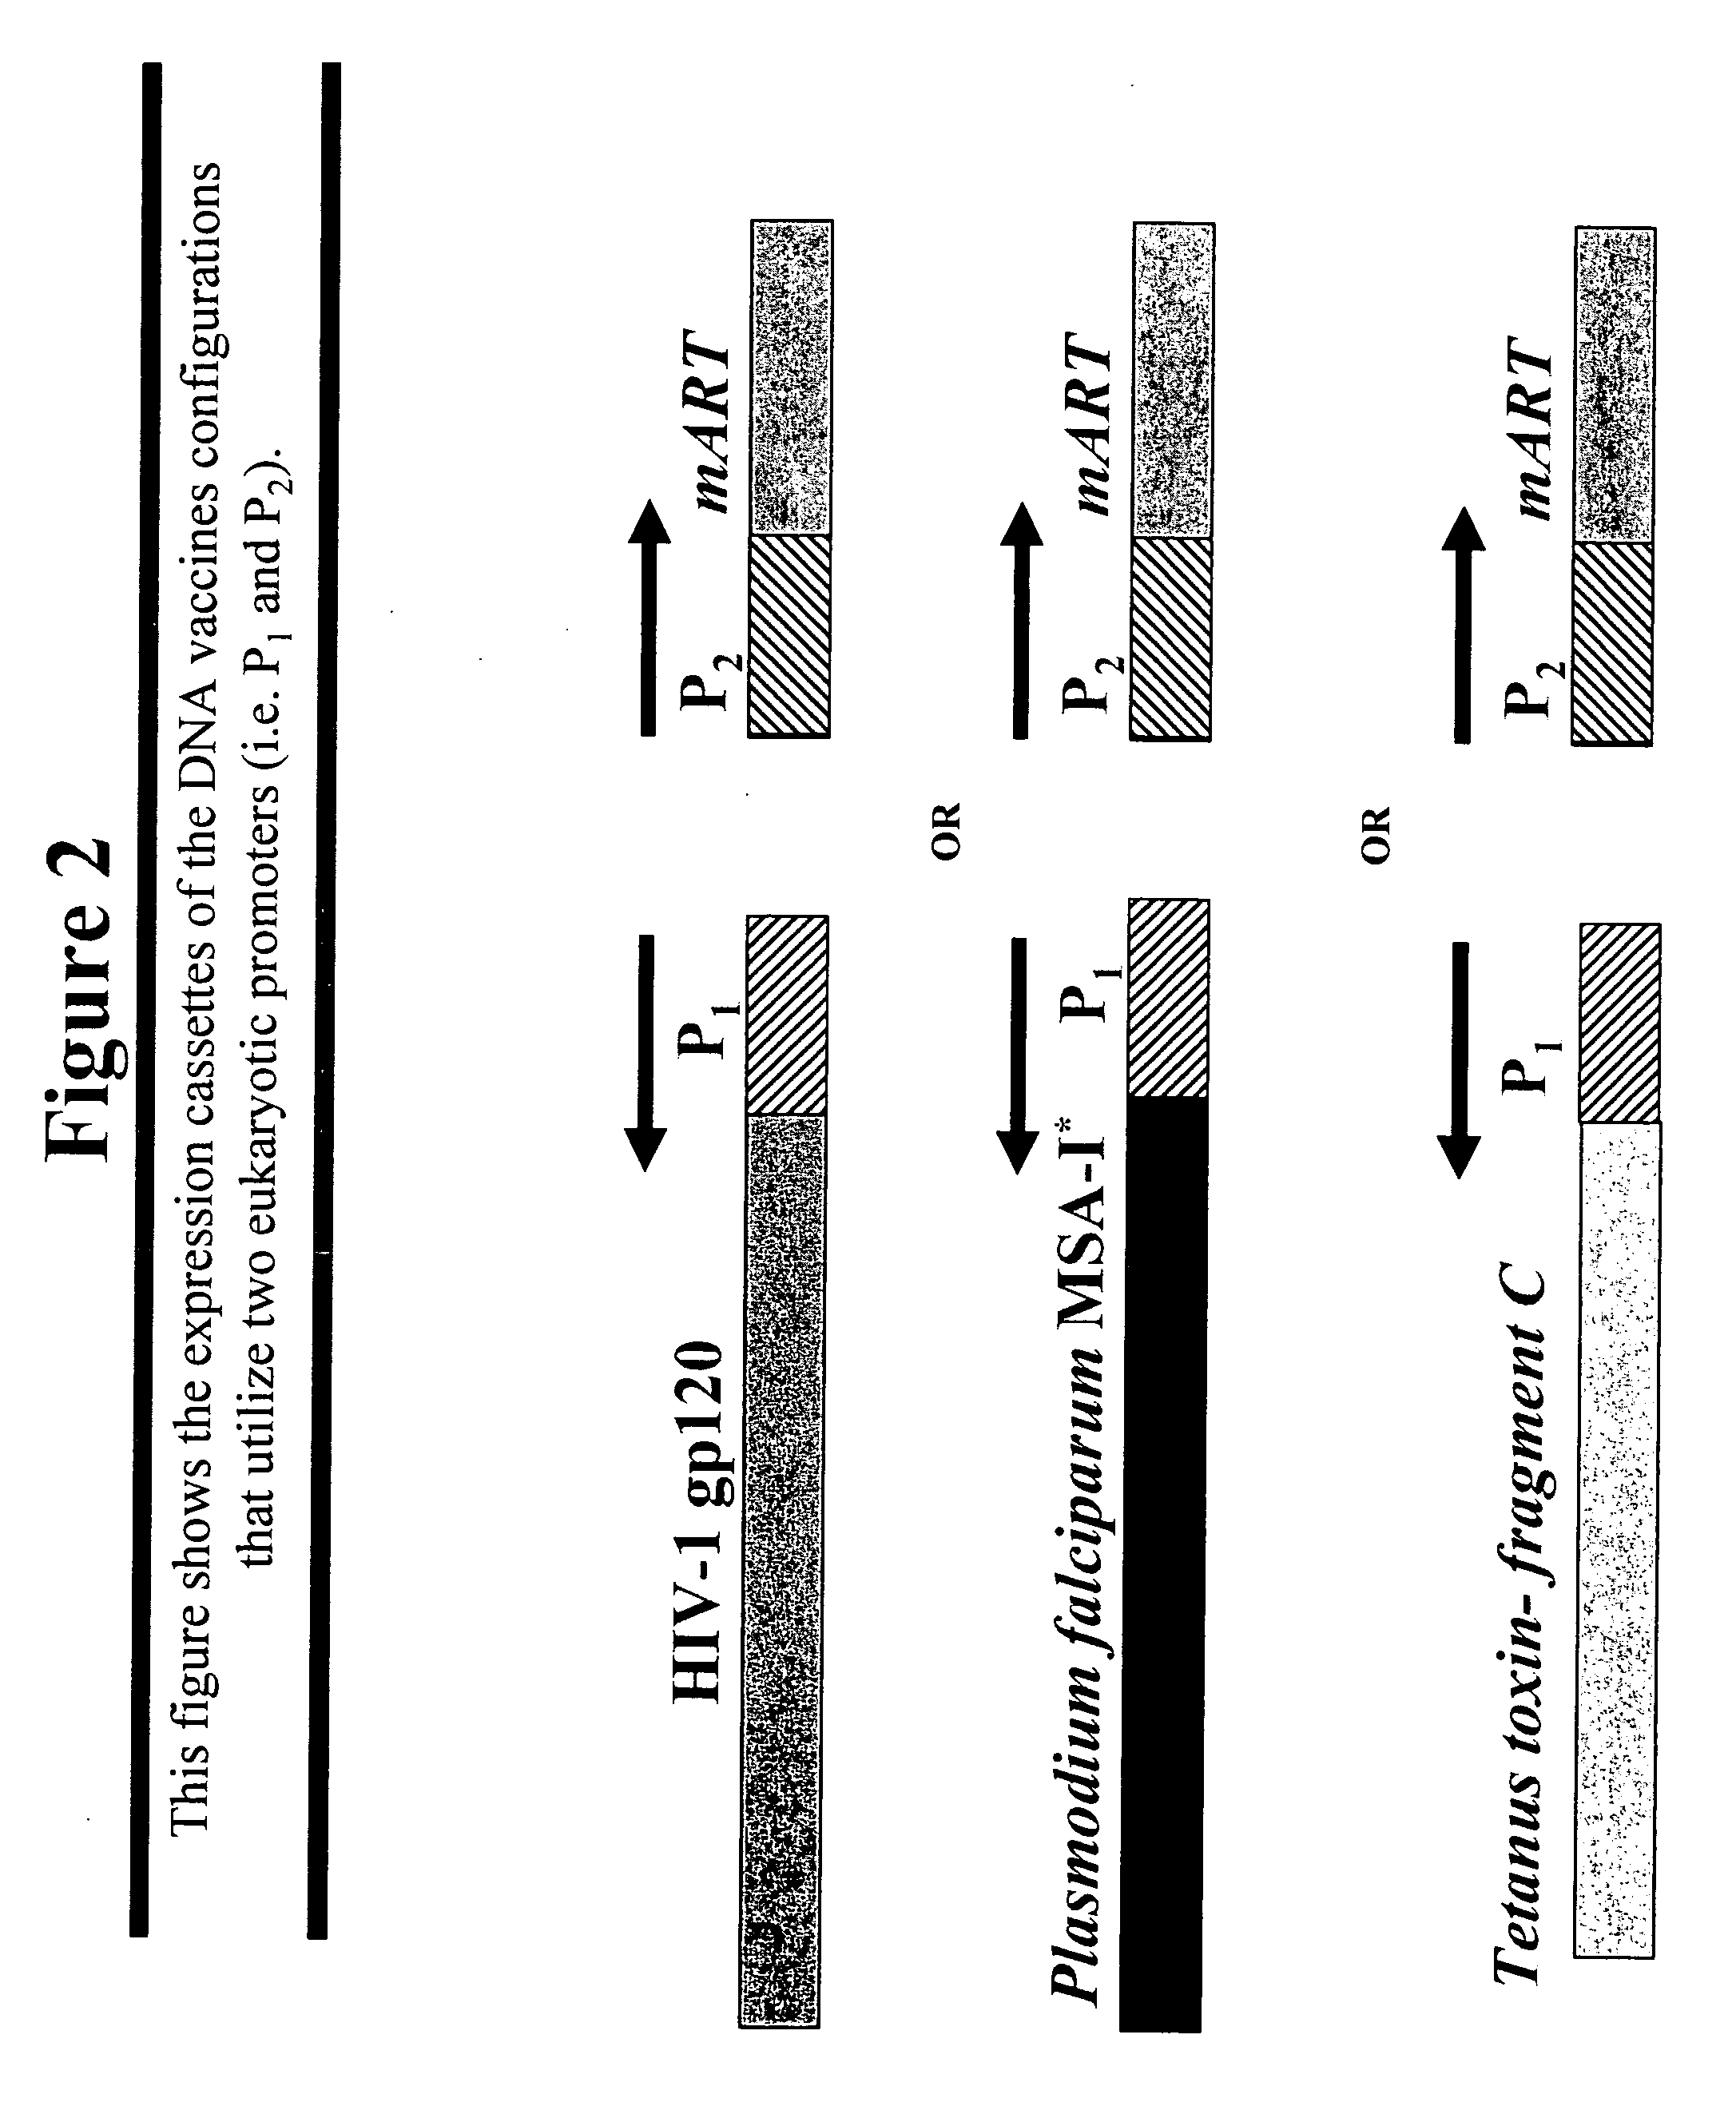 DNA vaccines that expresses mutant ADP-ribosyItransferase toxins which display reduced, or are devoid of, ADP-ribosyltransferase activity